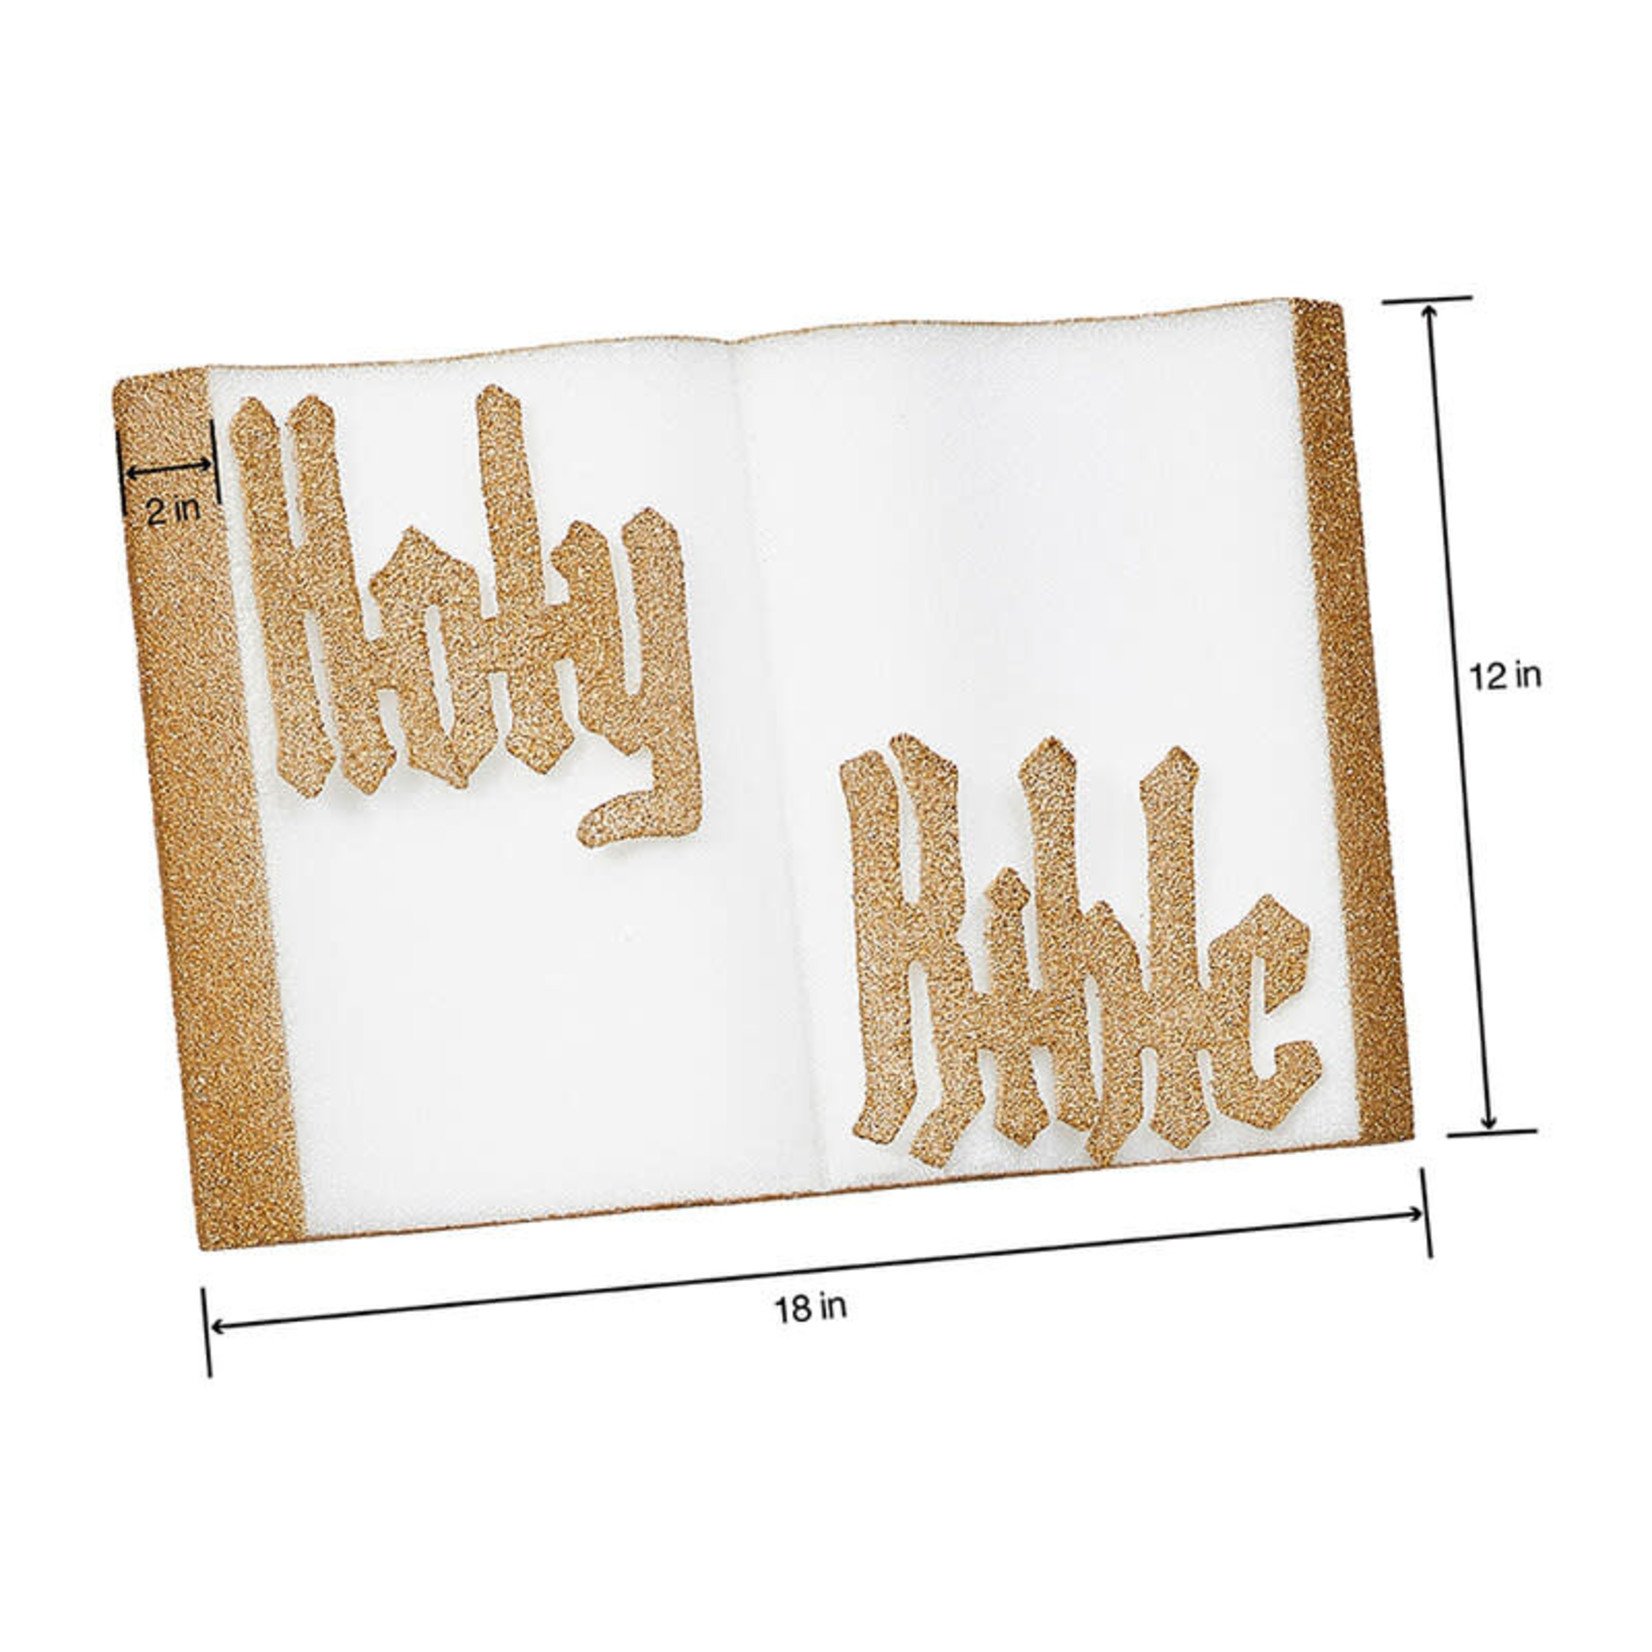 STYROFOAM BIBLE 18 X 12 X 2’’ WHITE W GOLD EDGE AND LETTERS